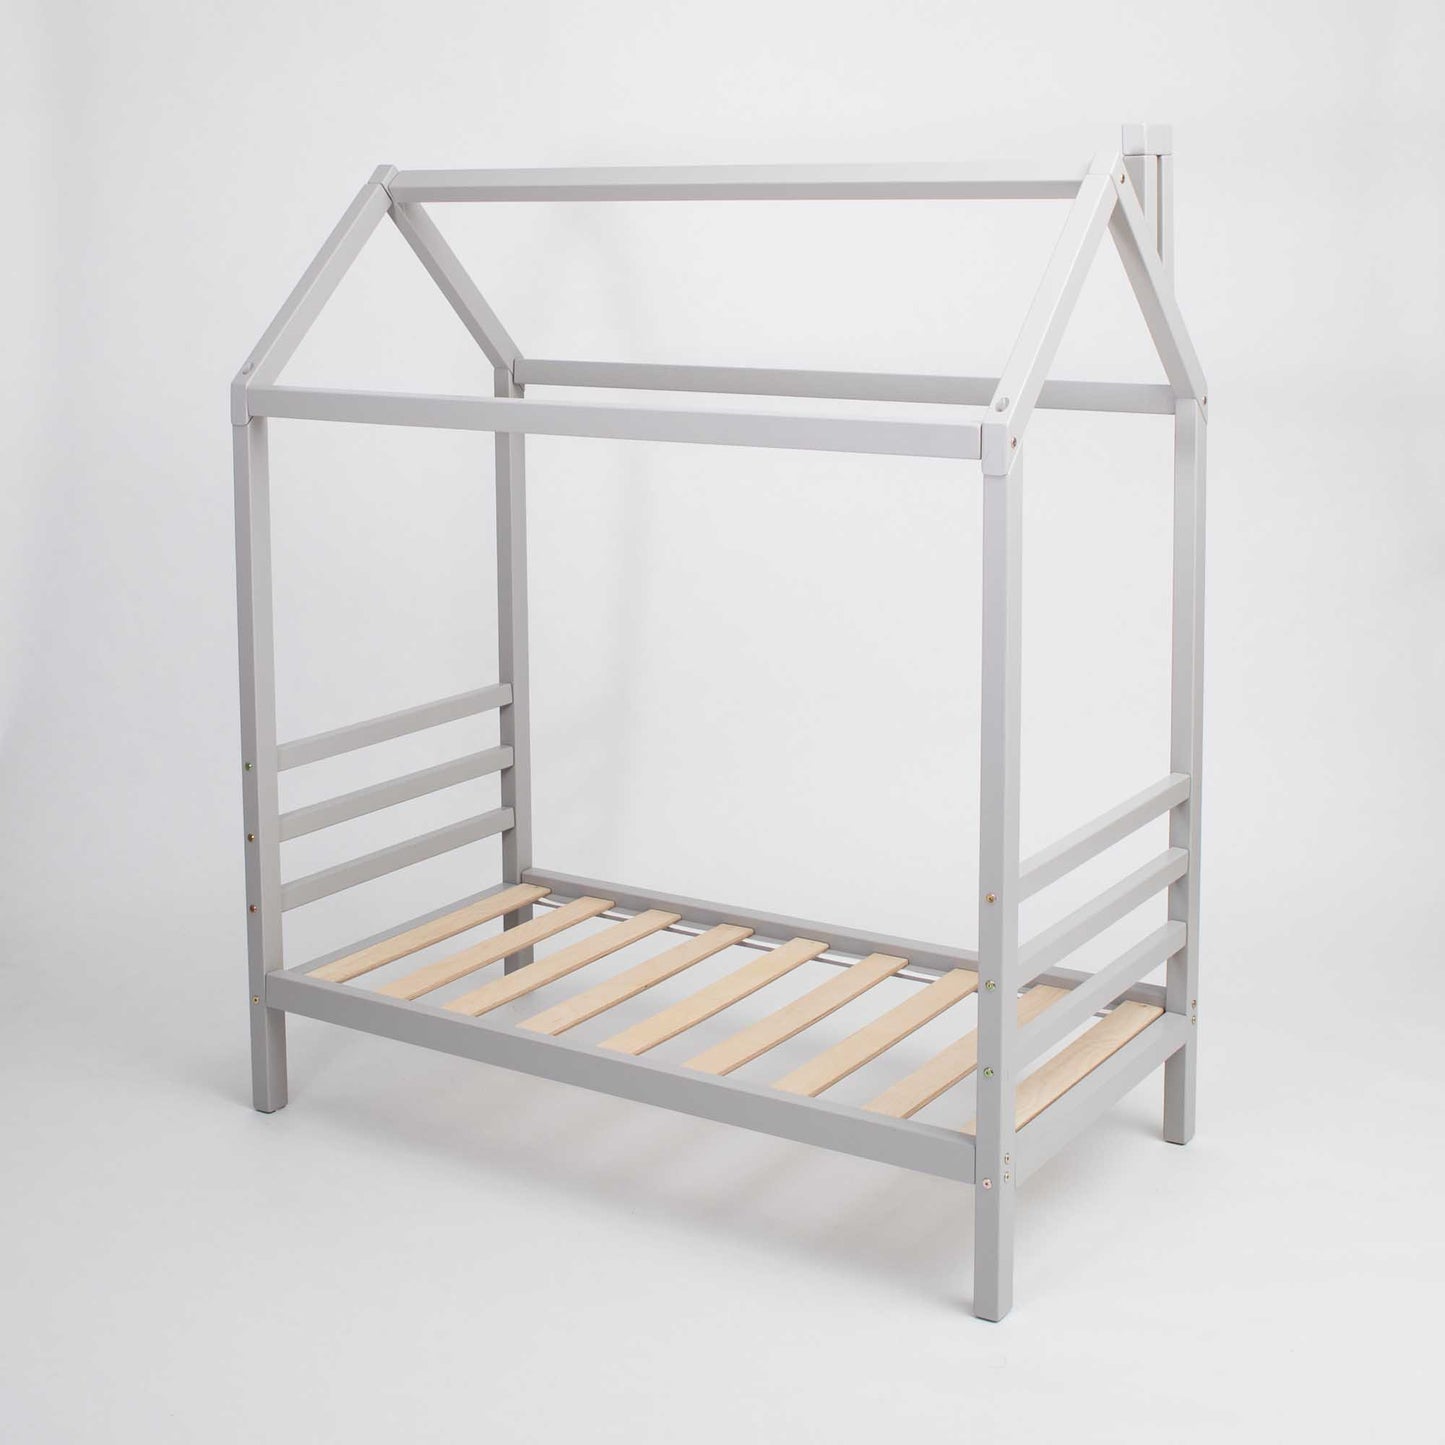 A Kids' house bed on legs with a headboard and footboard, made of grey wood, with wooden slats.